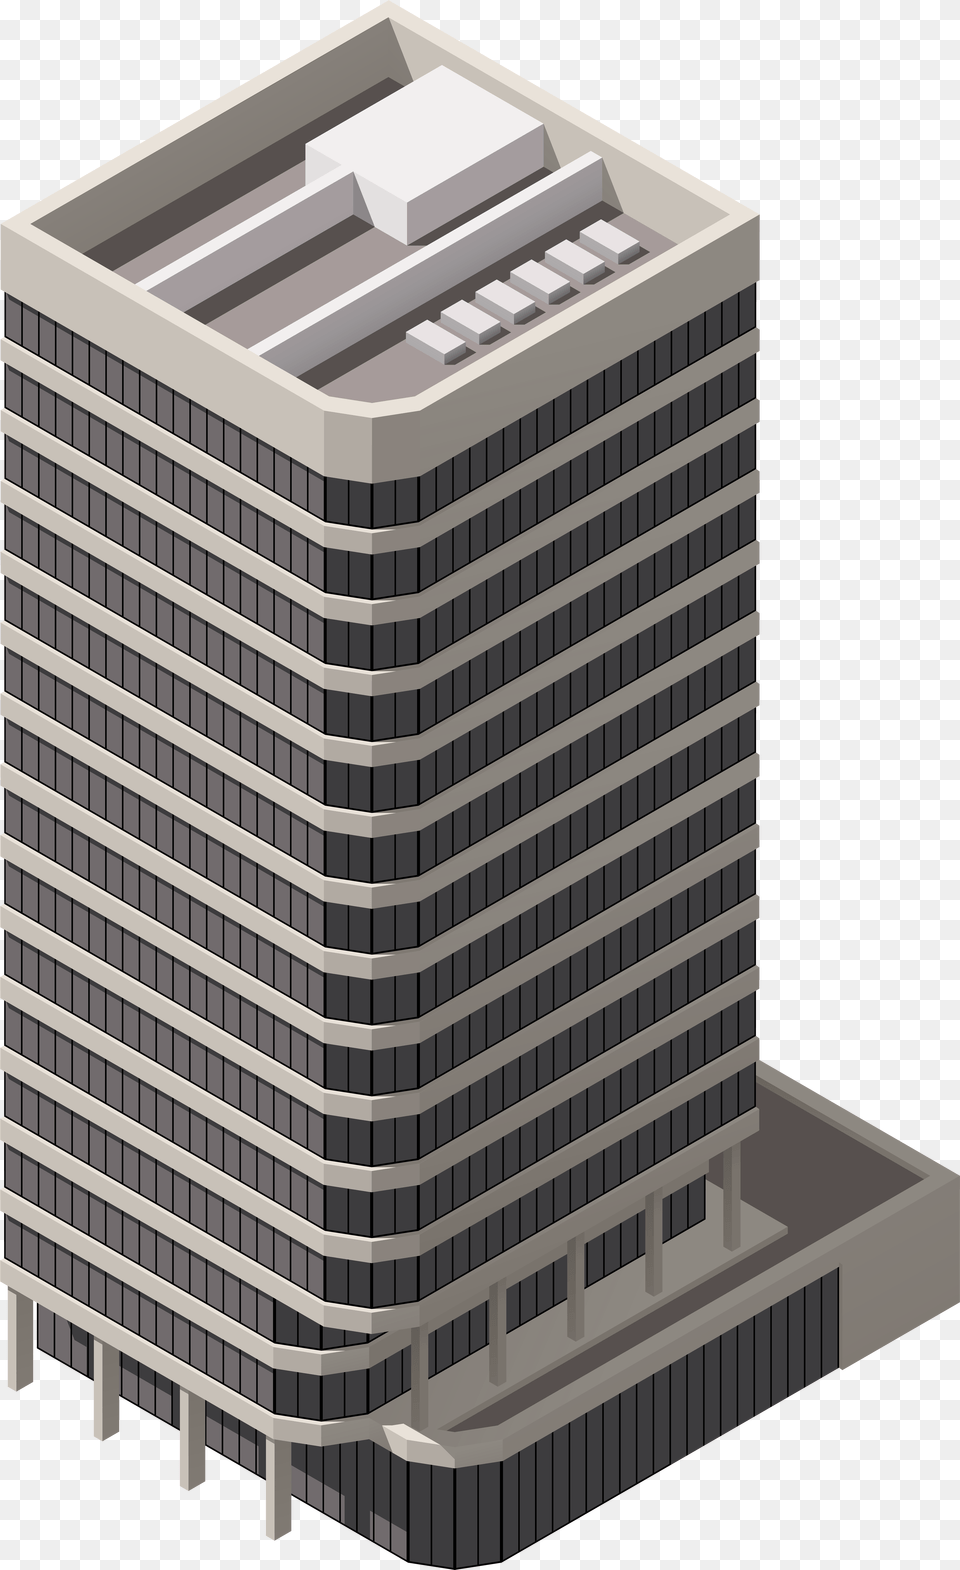 Big Residential Building Clipart Building Clip Art, Architecture, Housing, High Rise, Condo Png